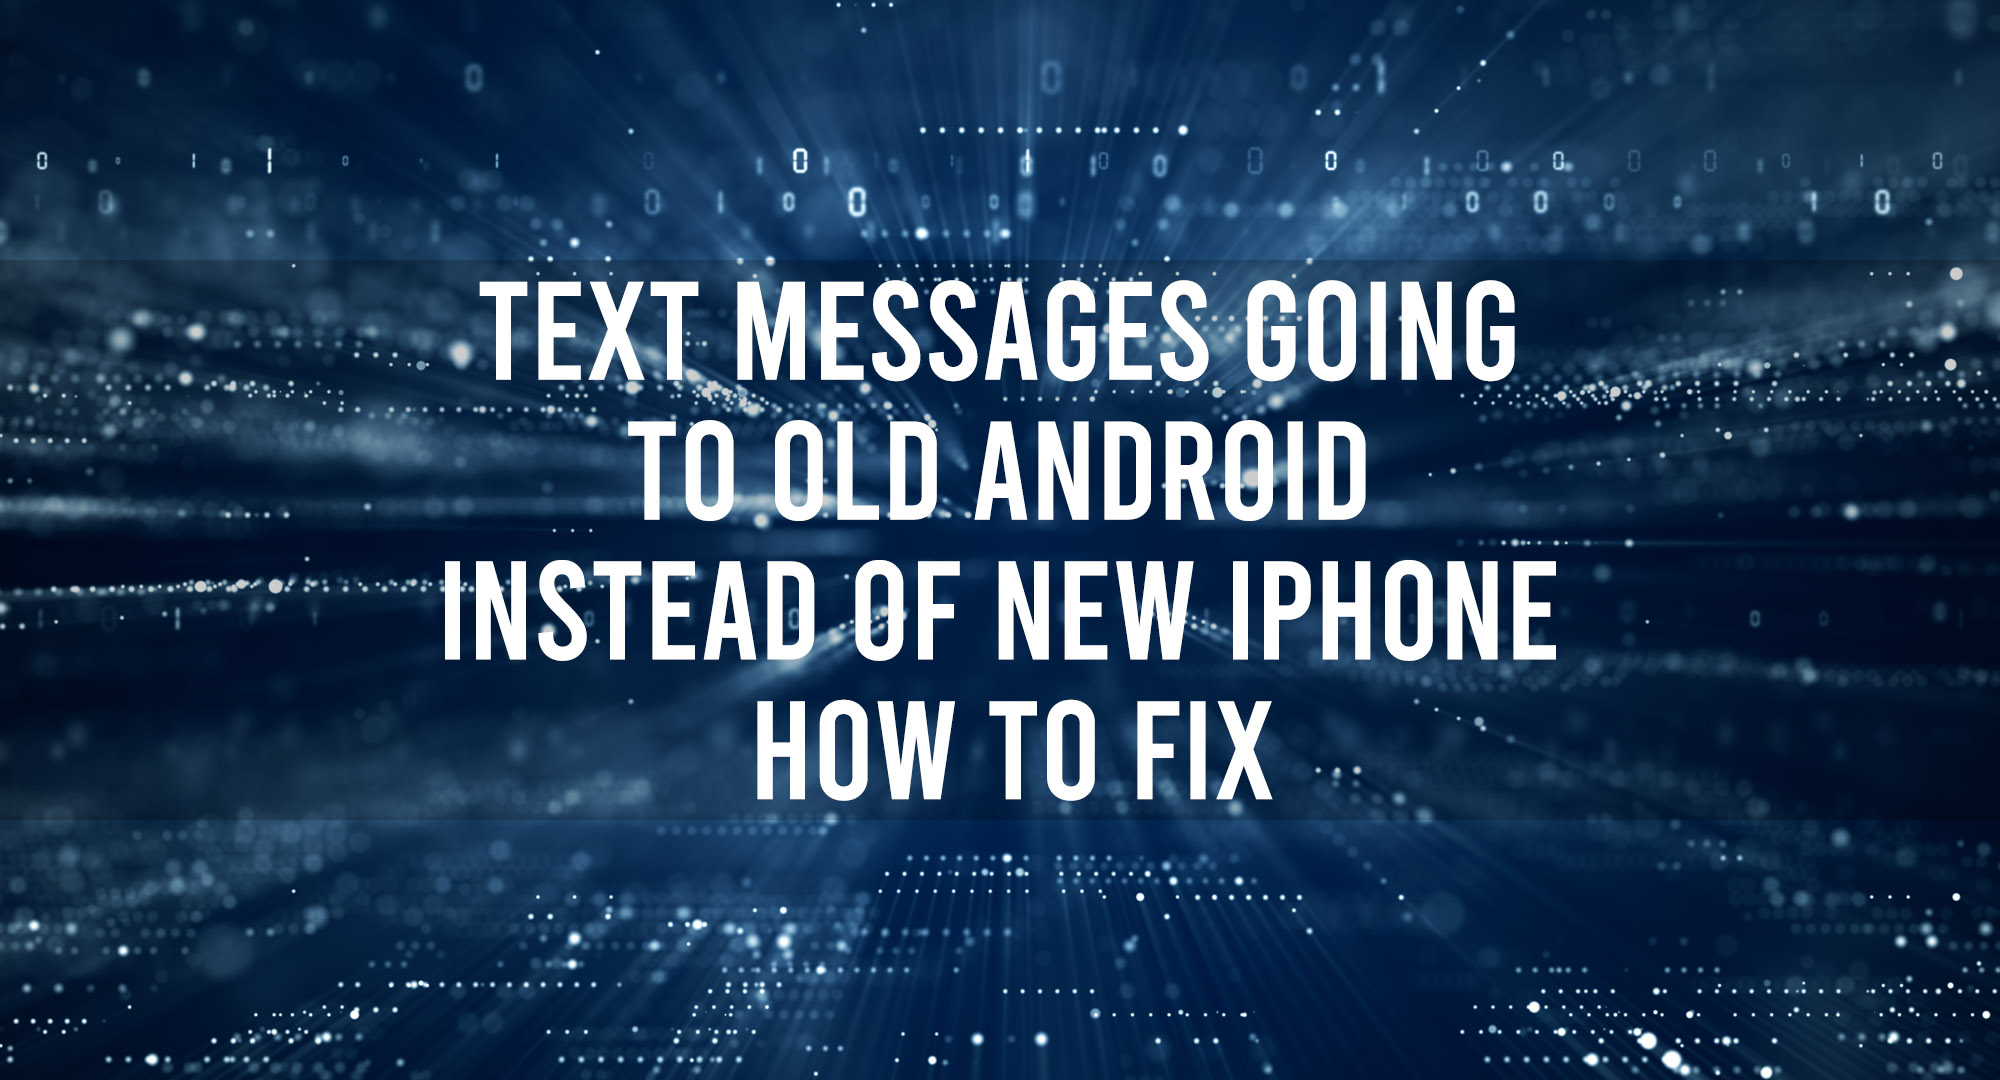 Text Messages Going to Old Android Instead of New iPhone